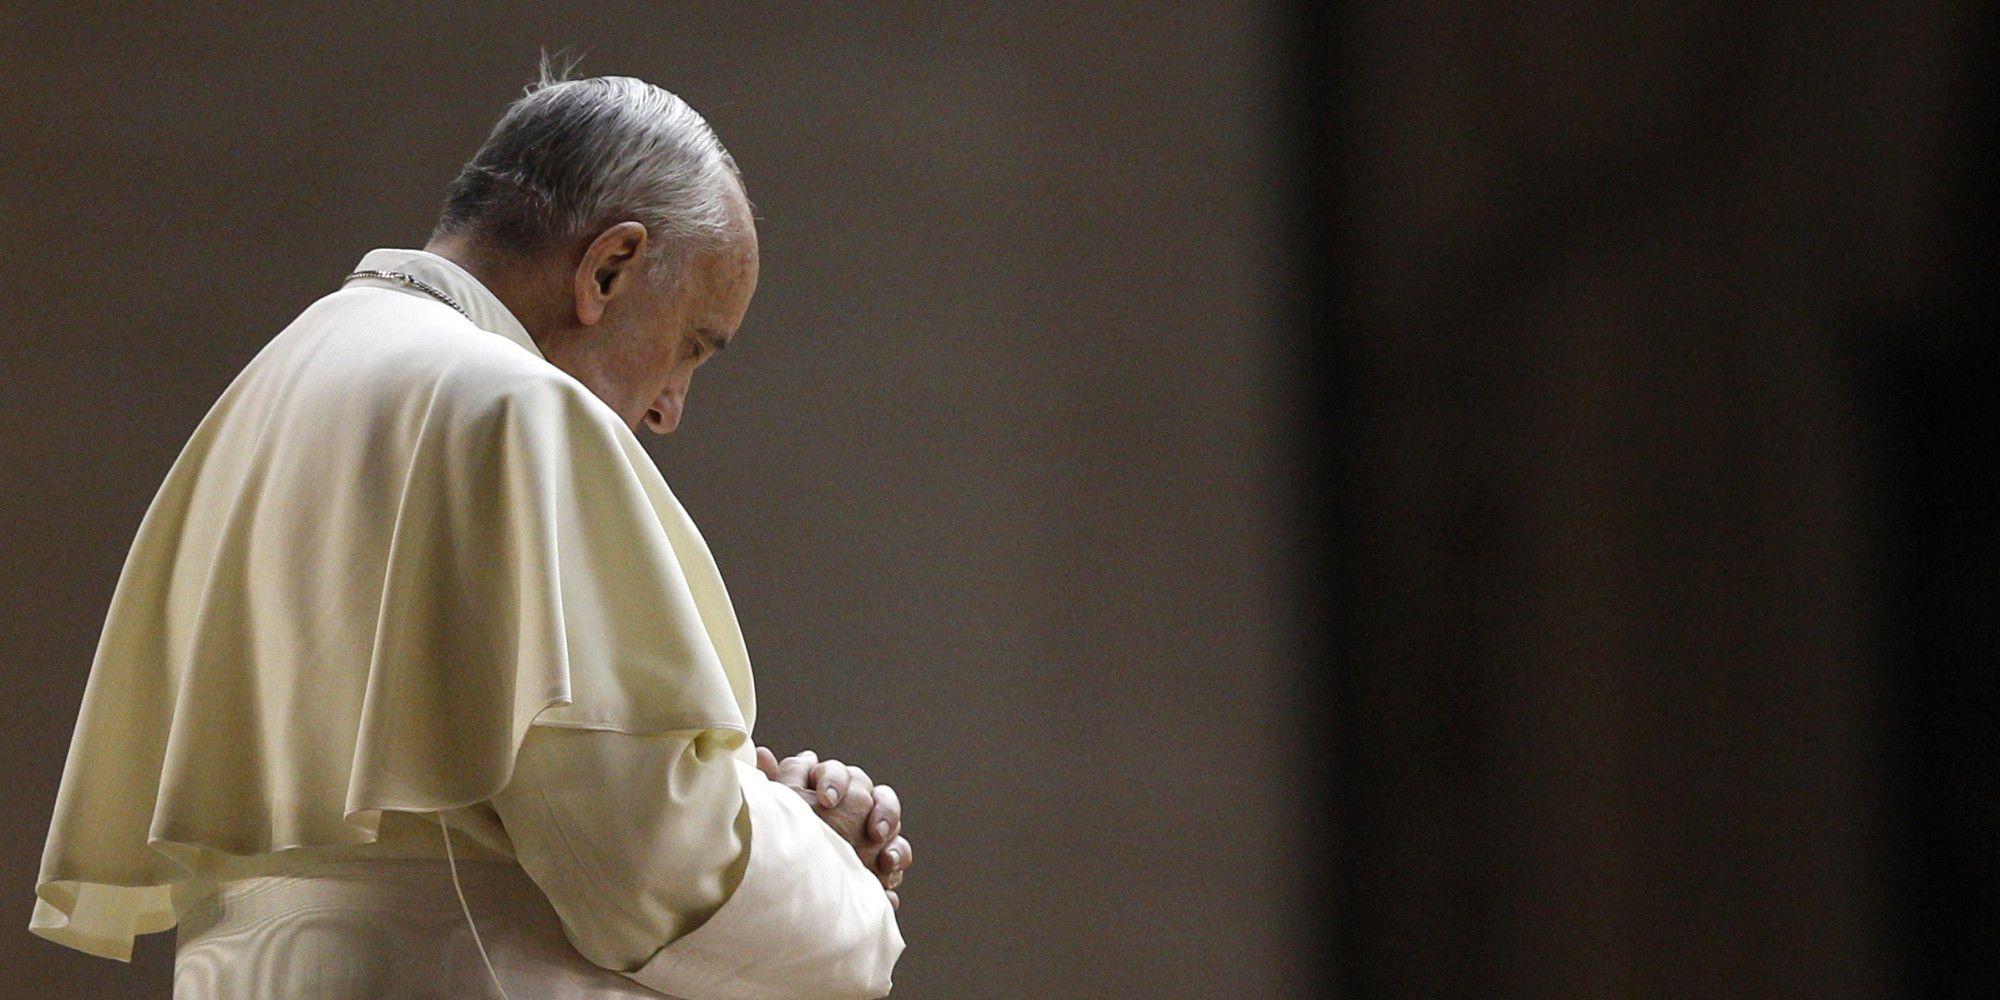 Pope Francis to Die Zeit: 'I too have moments of emptiness